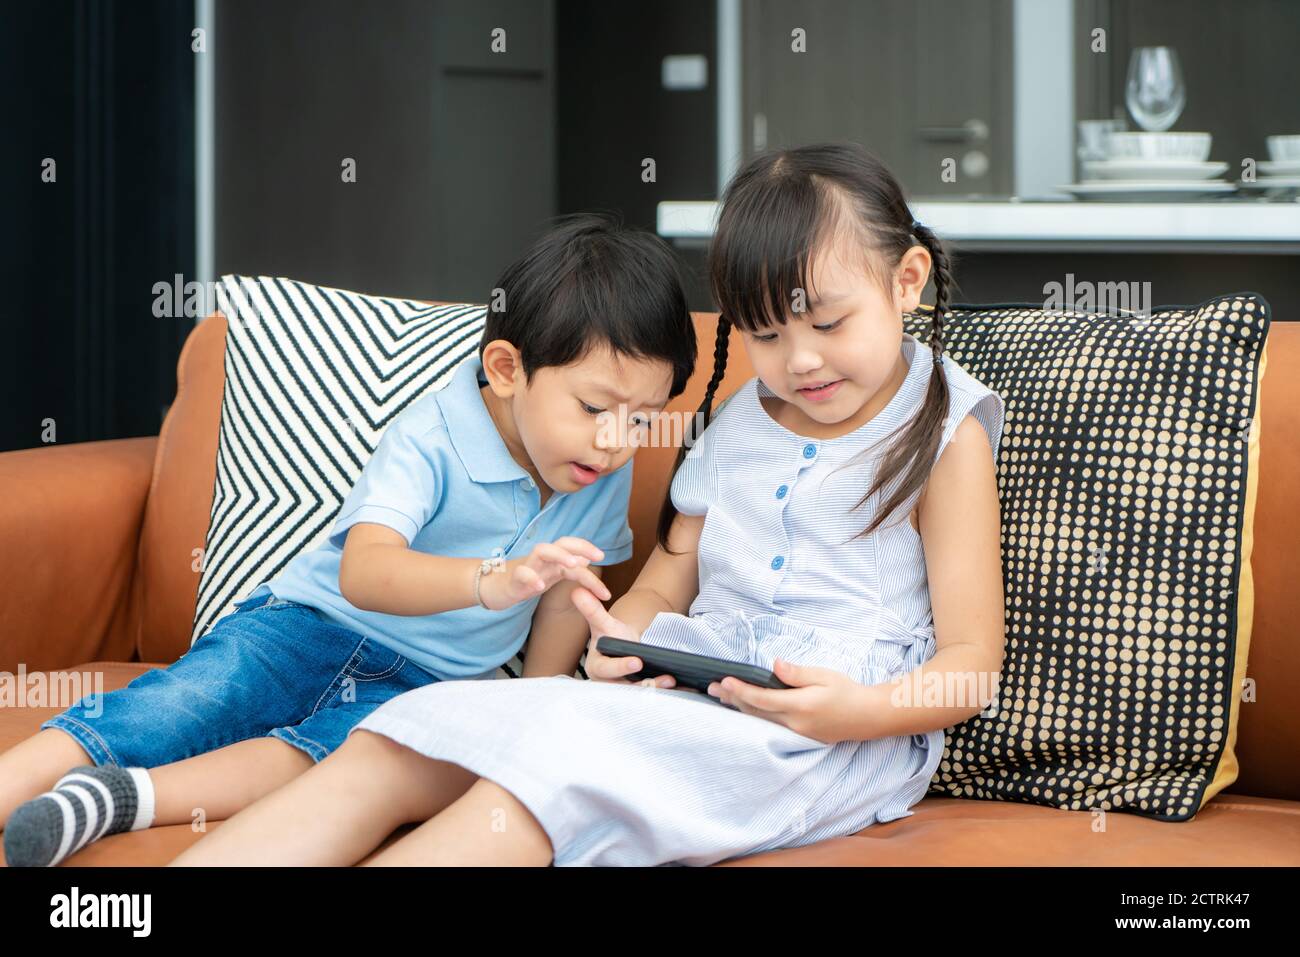 Asian cute sibling child using a smartphone and smiling for watching video or play game togerther while sitting on sofa in living room at home Stock Photo